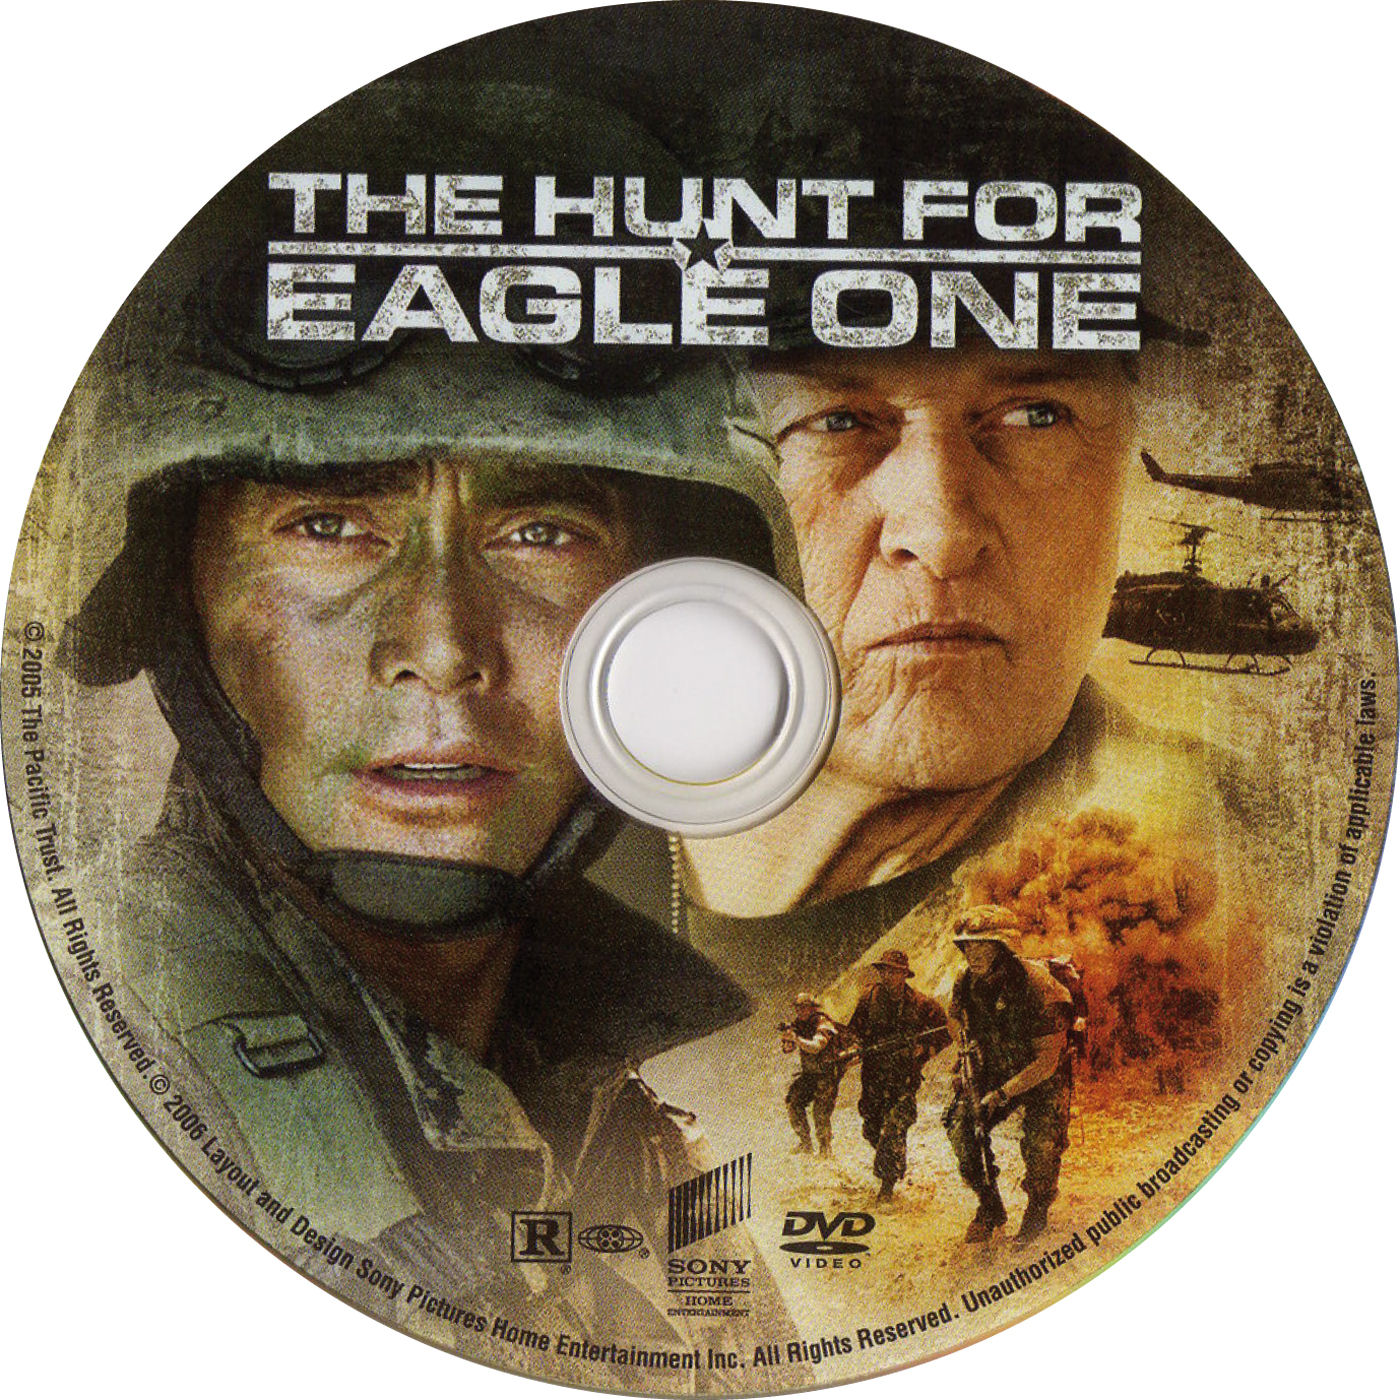 The hunt for eagle one 2006